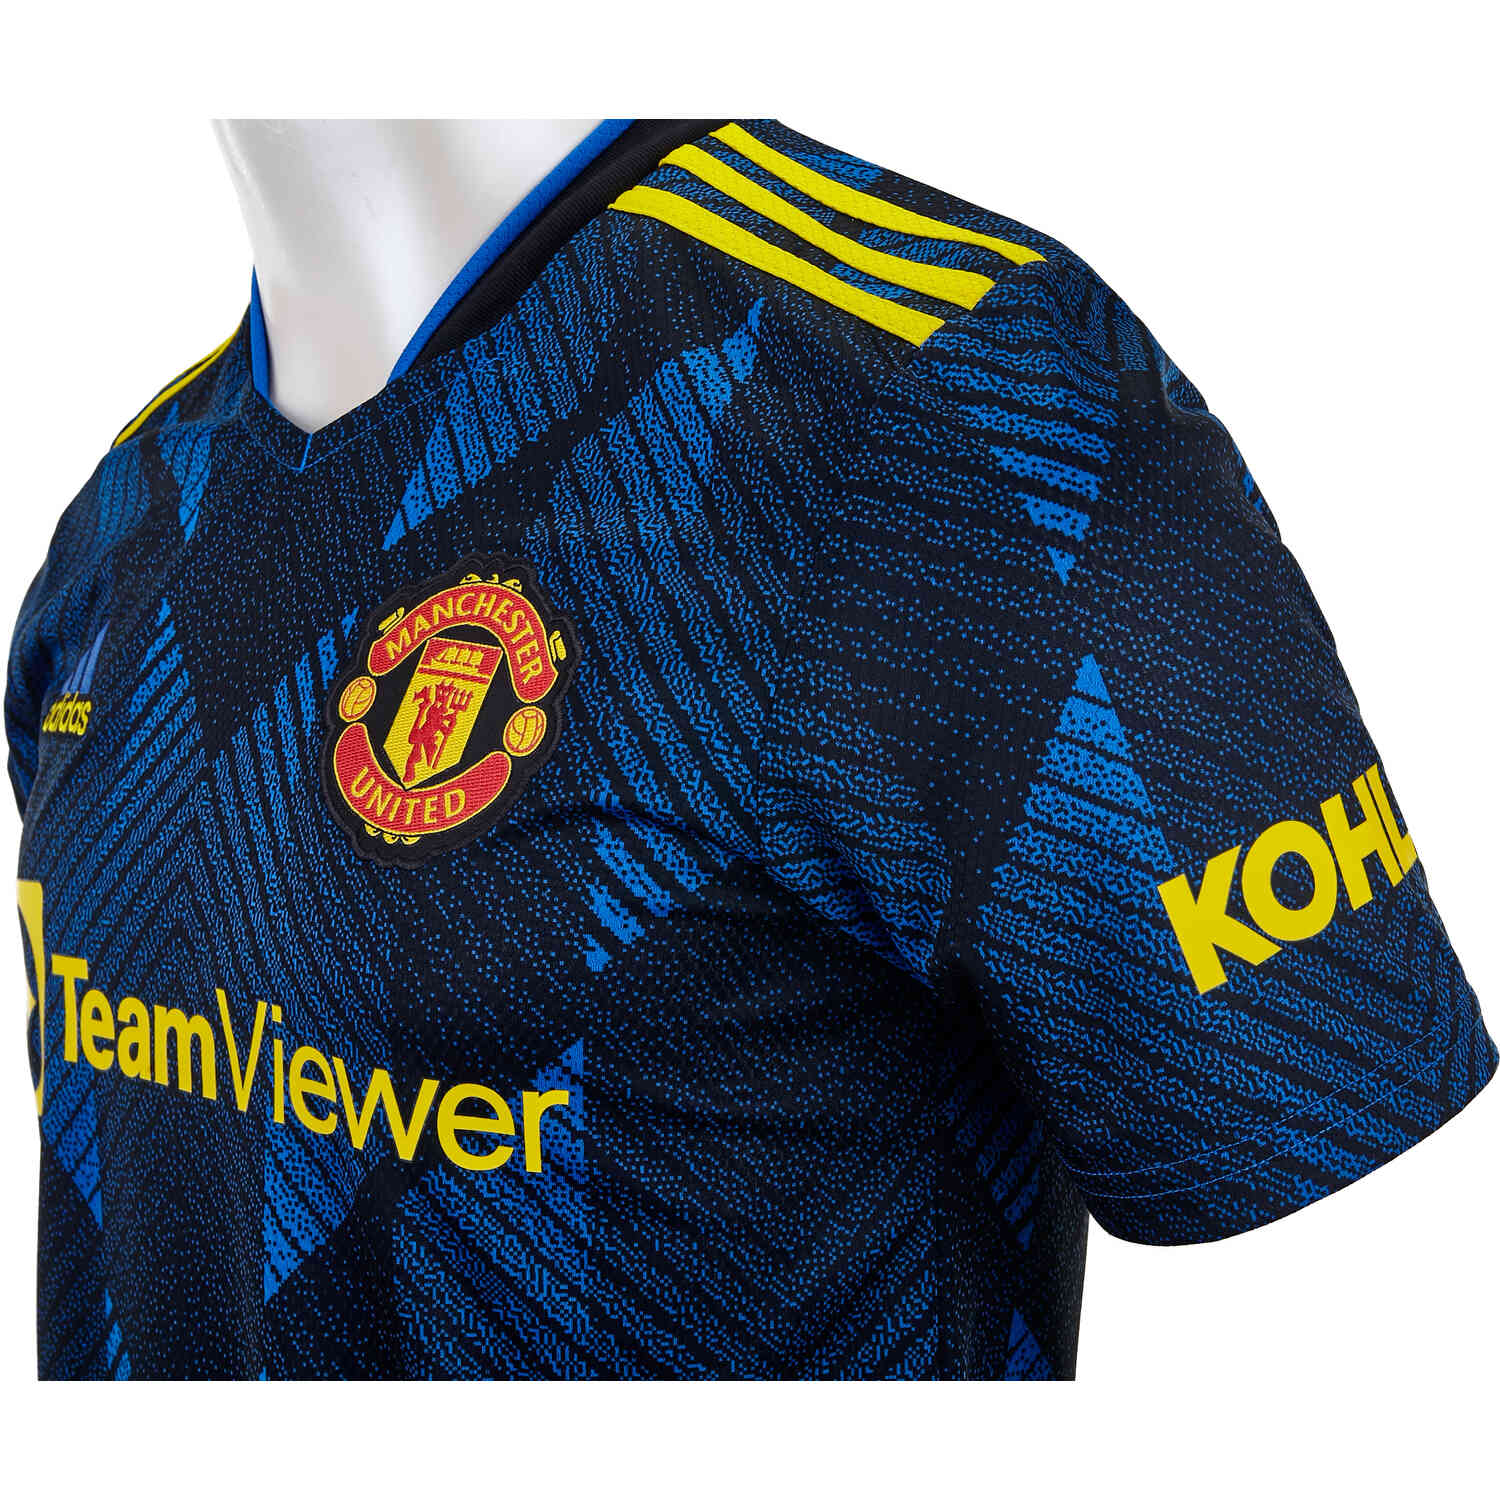 2021/22 adidas Manchester United 3rd Soccer Master